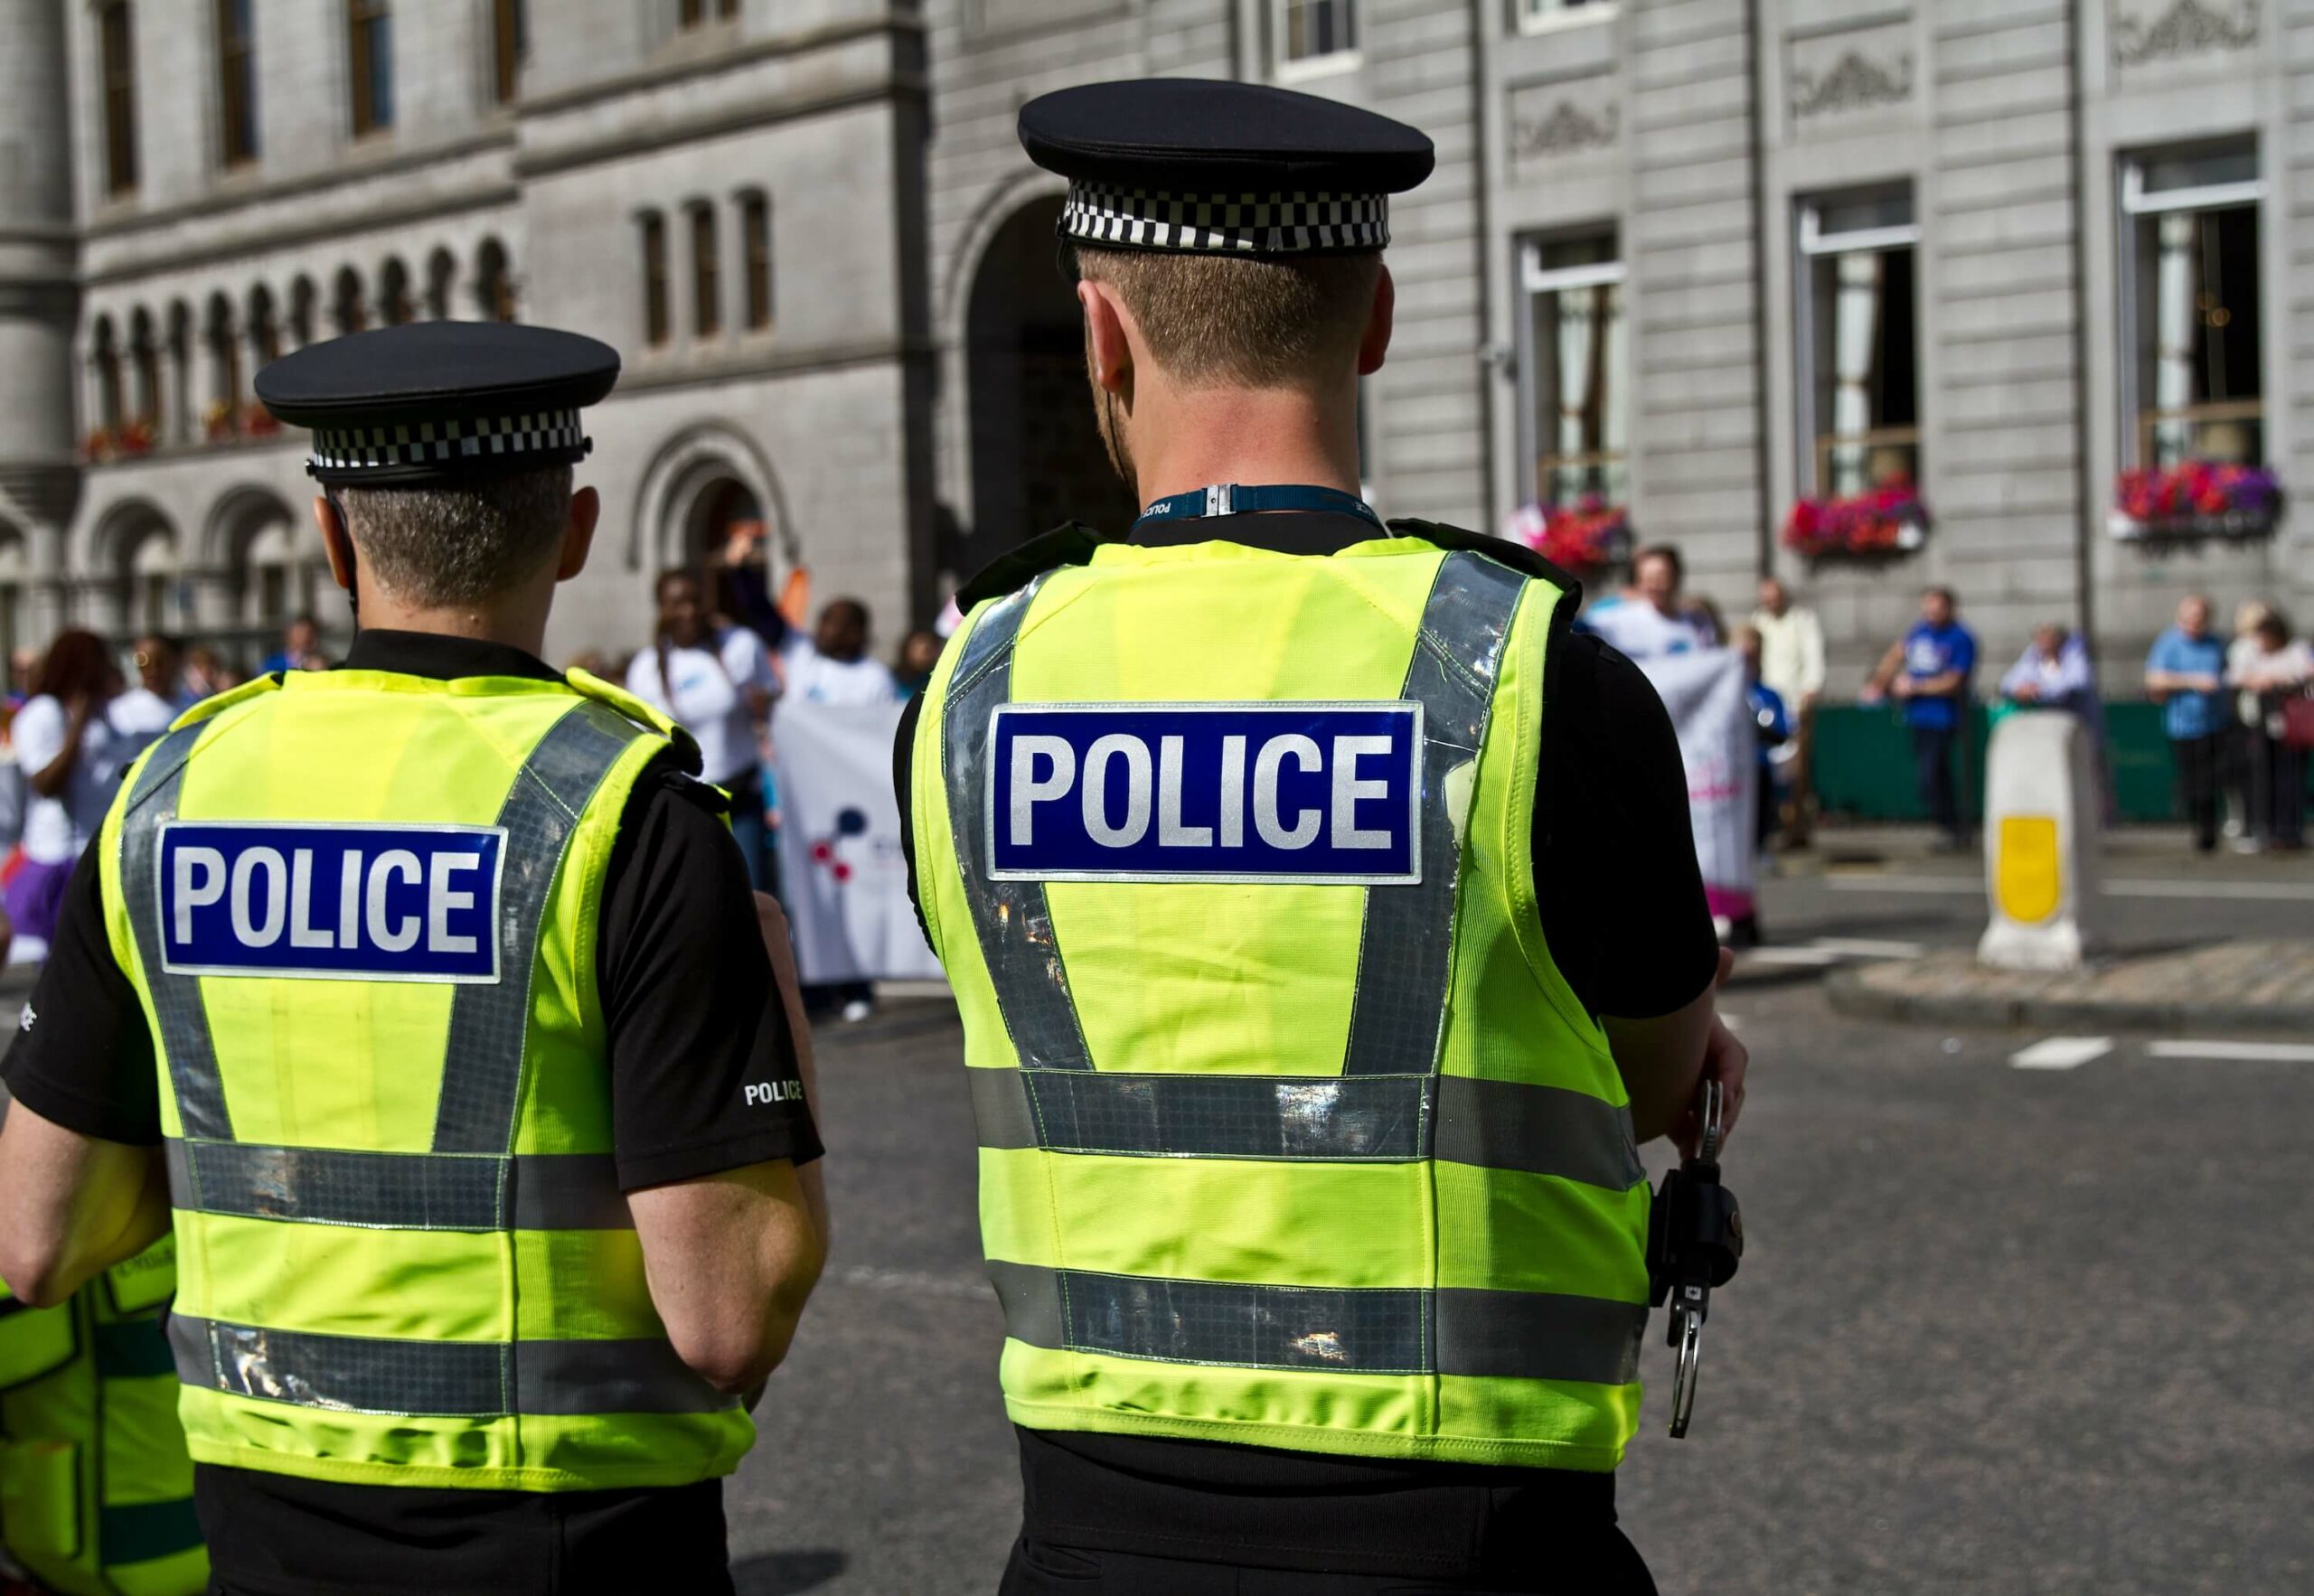 UK police offers giving a police caution. But how long does a police caution last?